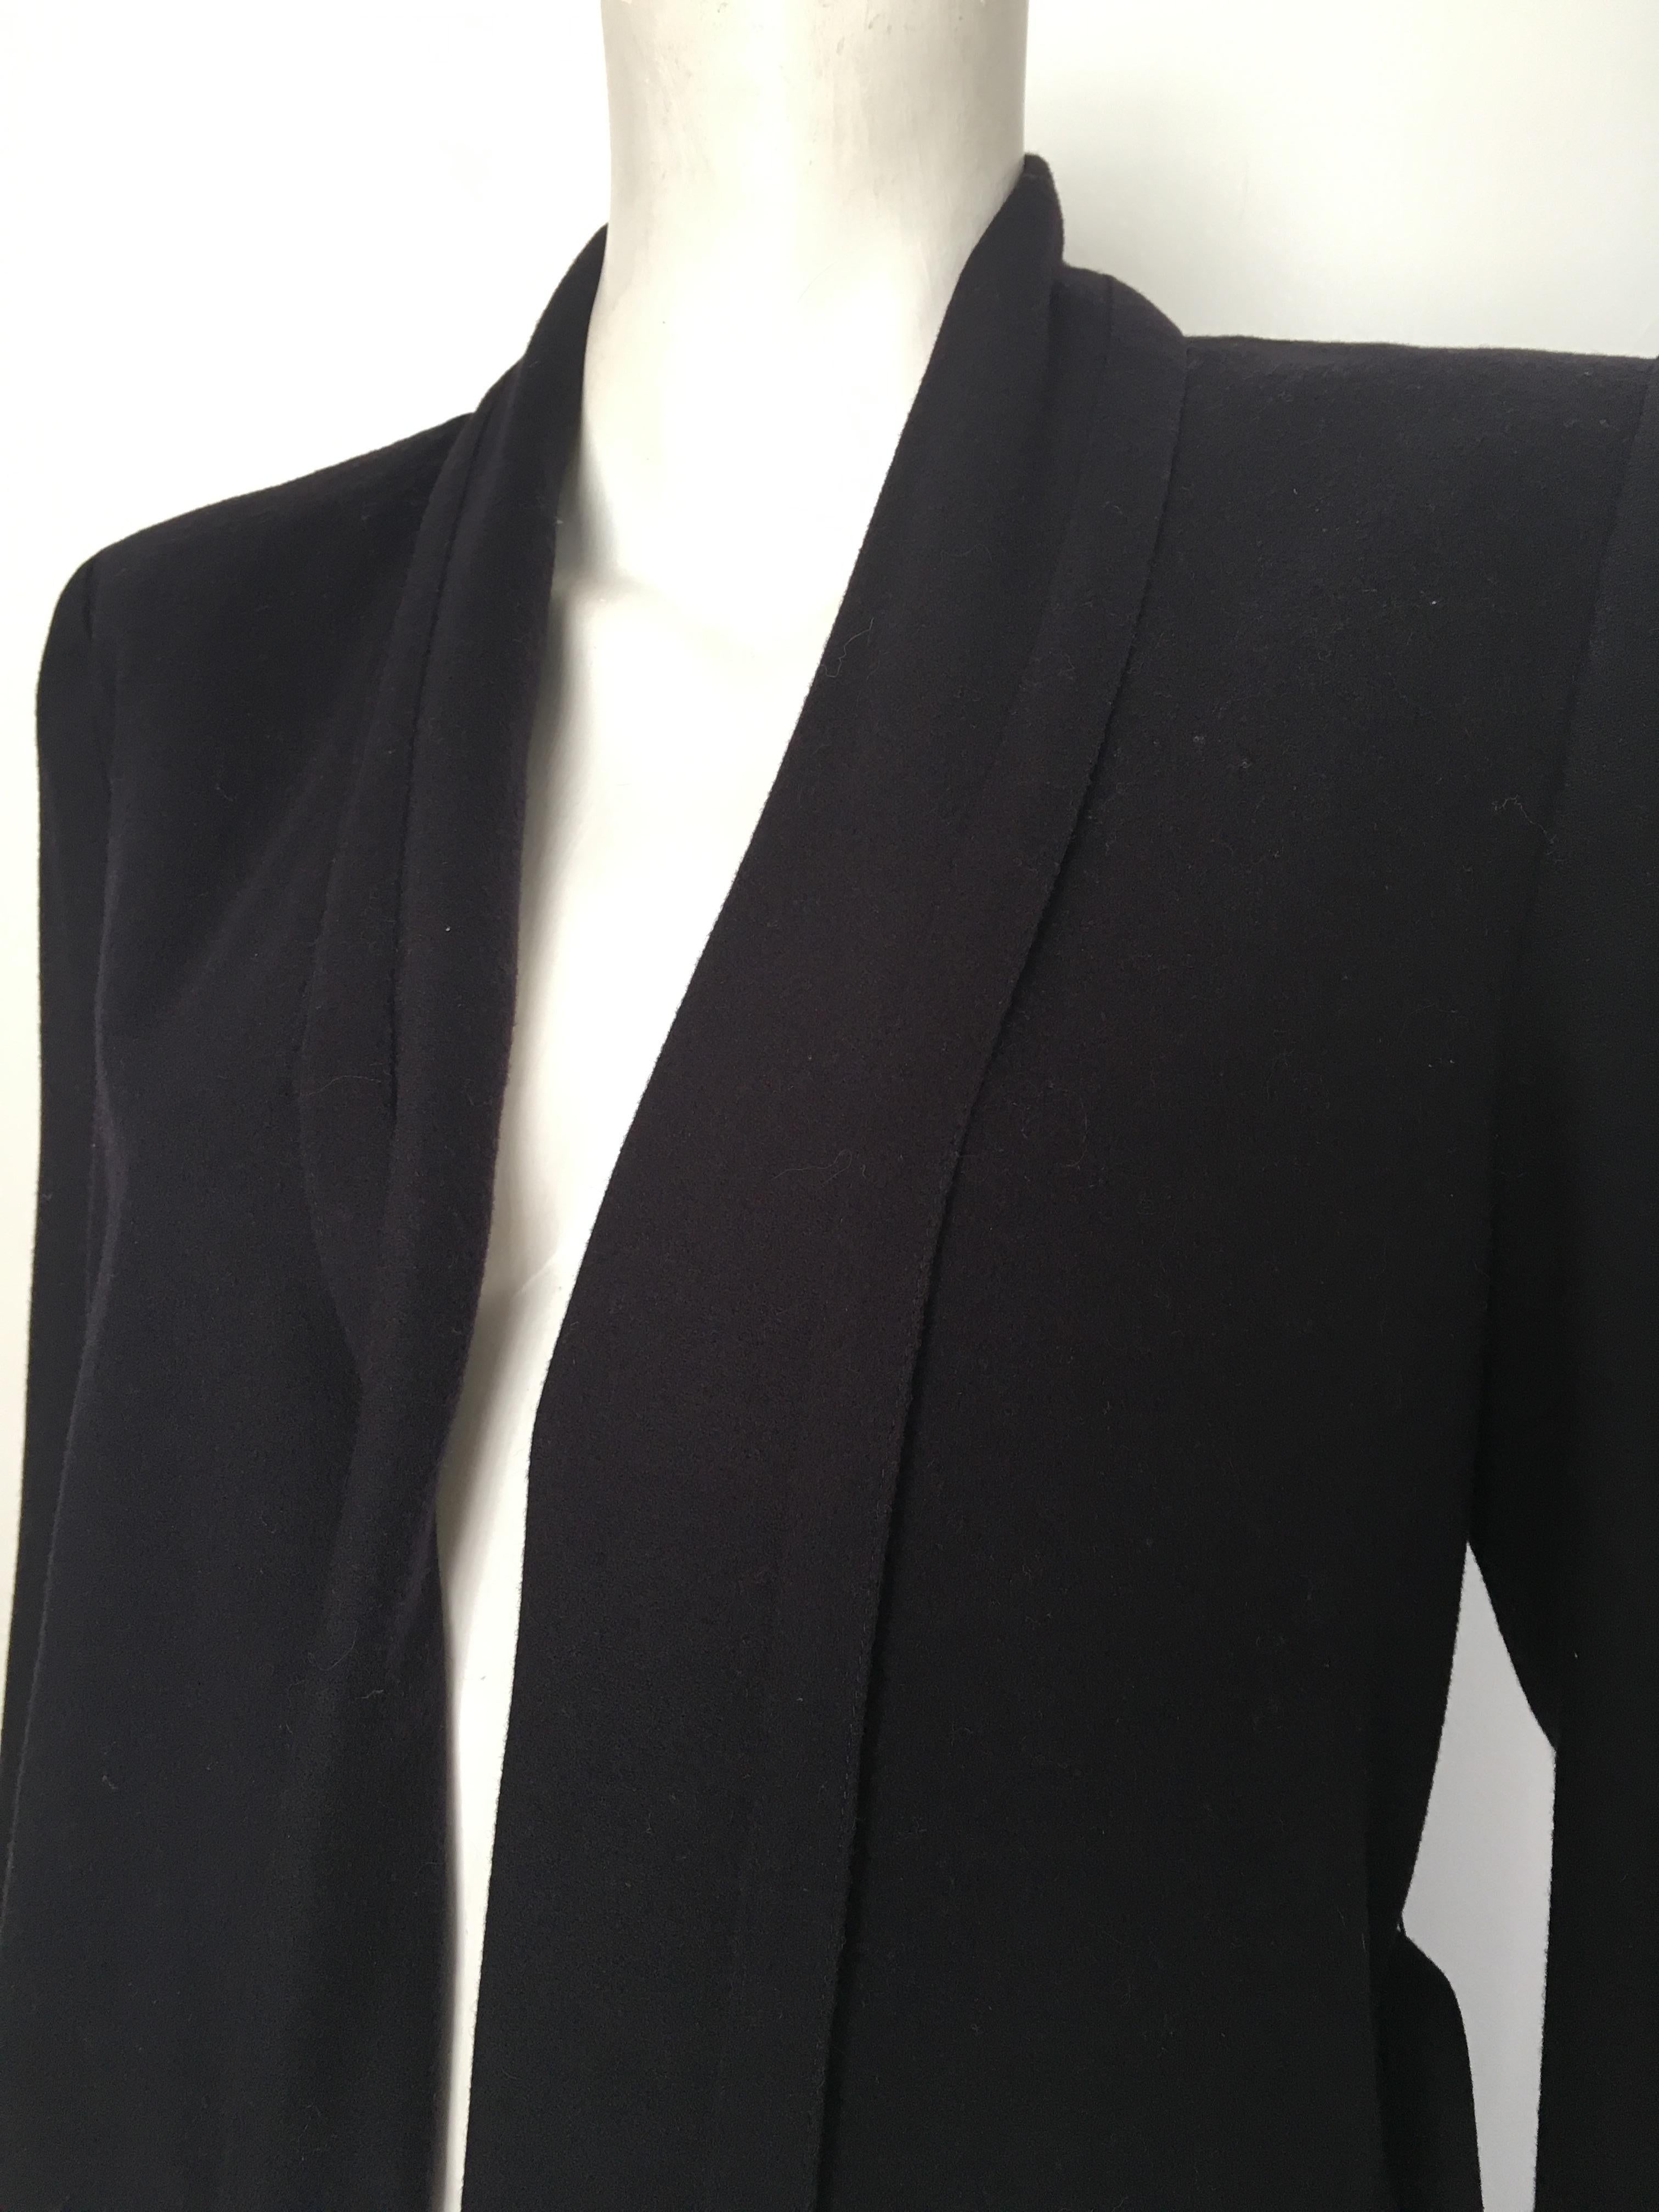 Jean-Louis Scherrer 1980s Navy Wool Light Weight Coat with Pockets Size 6 / 8.  For Sale 7